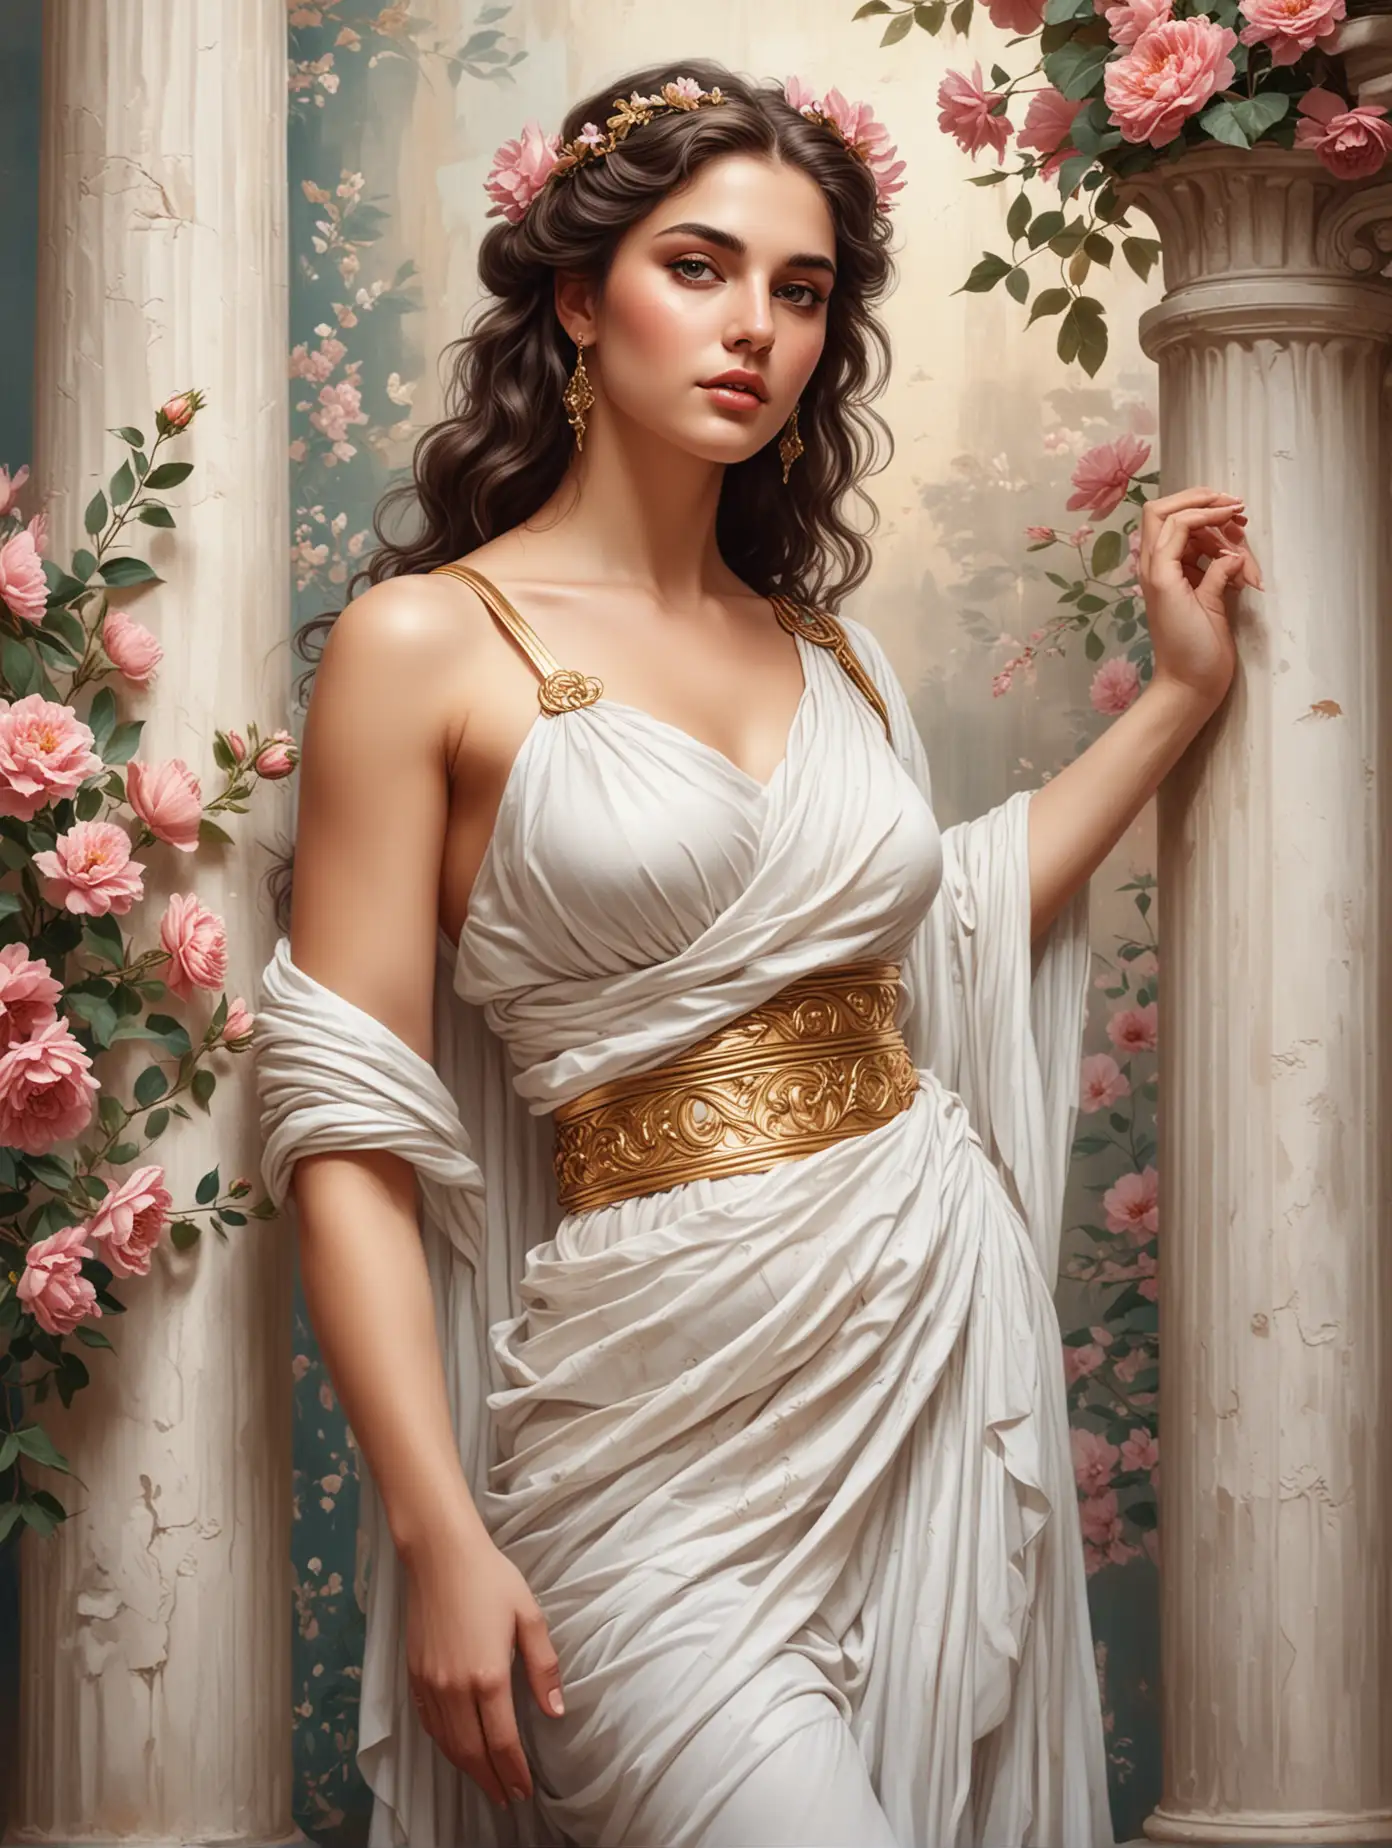 illustration of a beautiful Greek goddess, she is glamorous, cinched waist, columns with flowers in the background, portrait